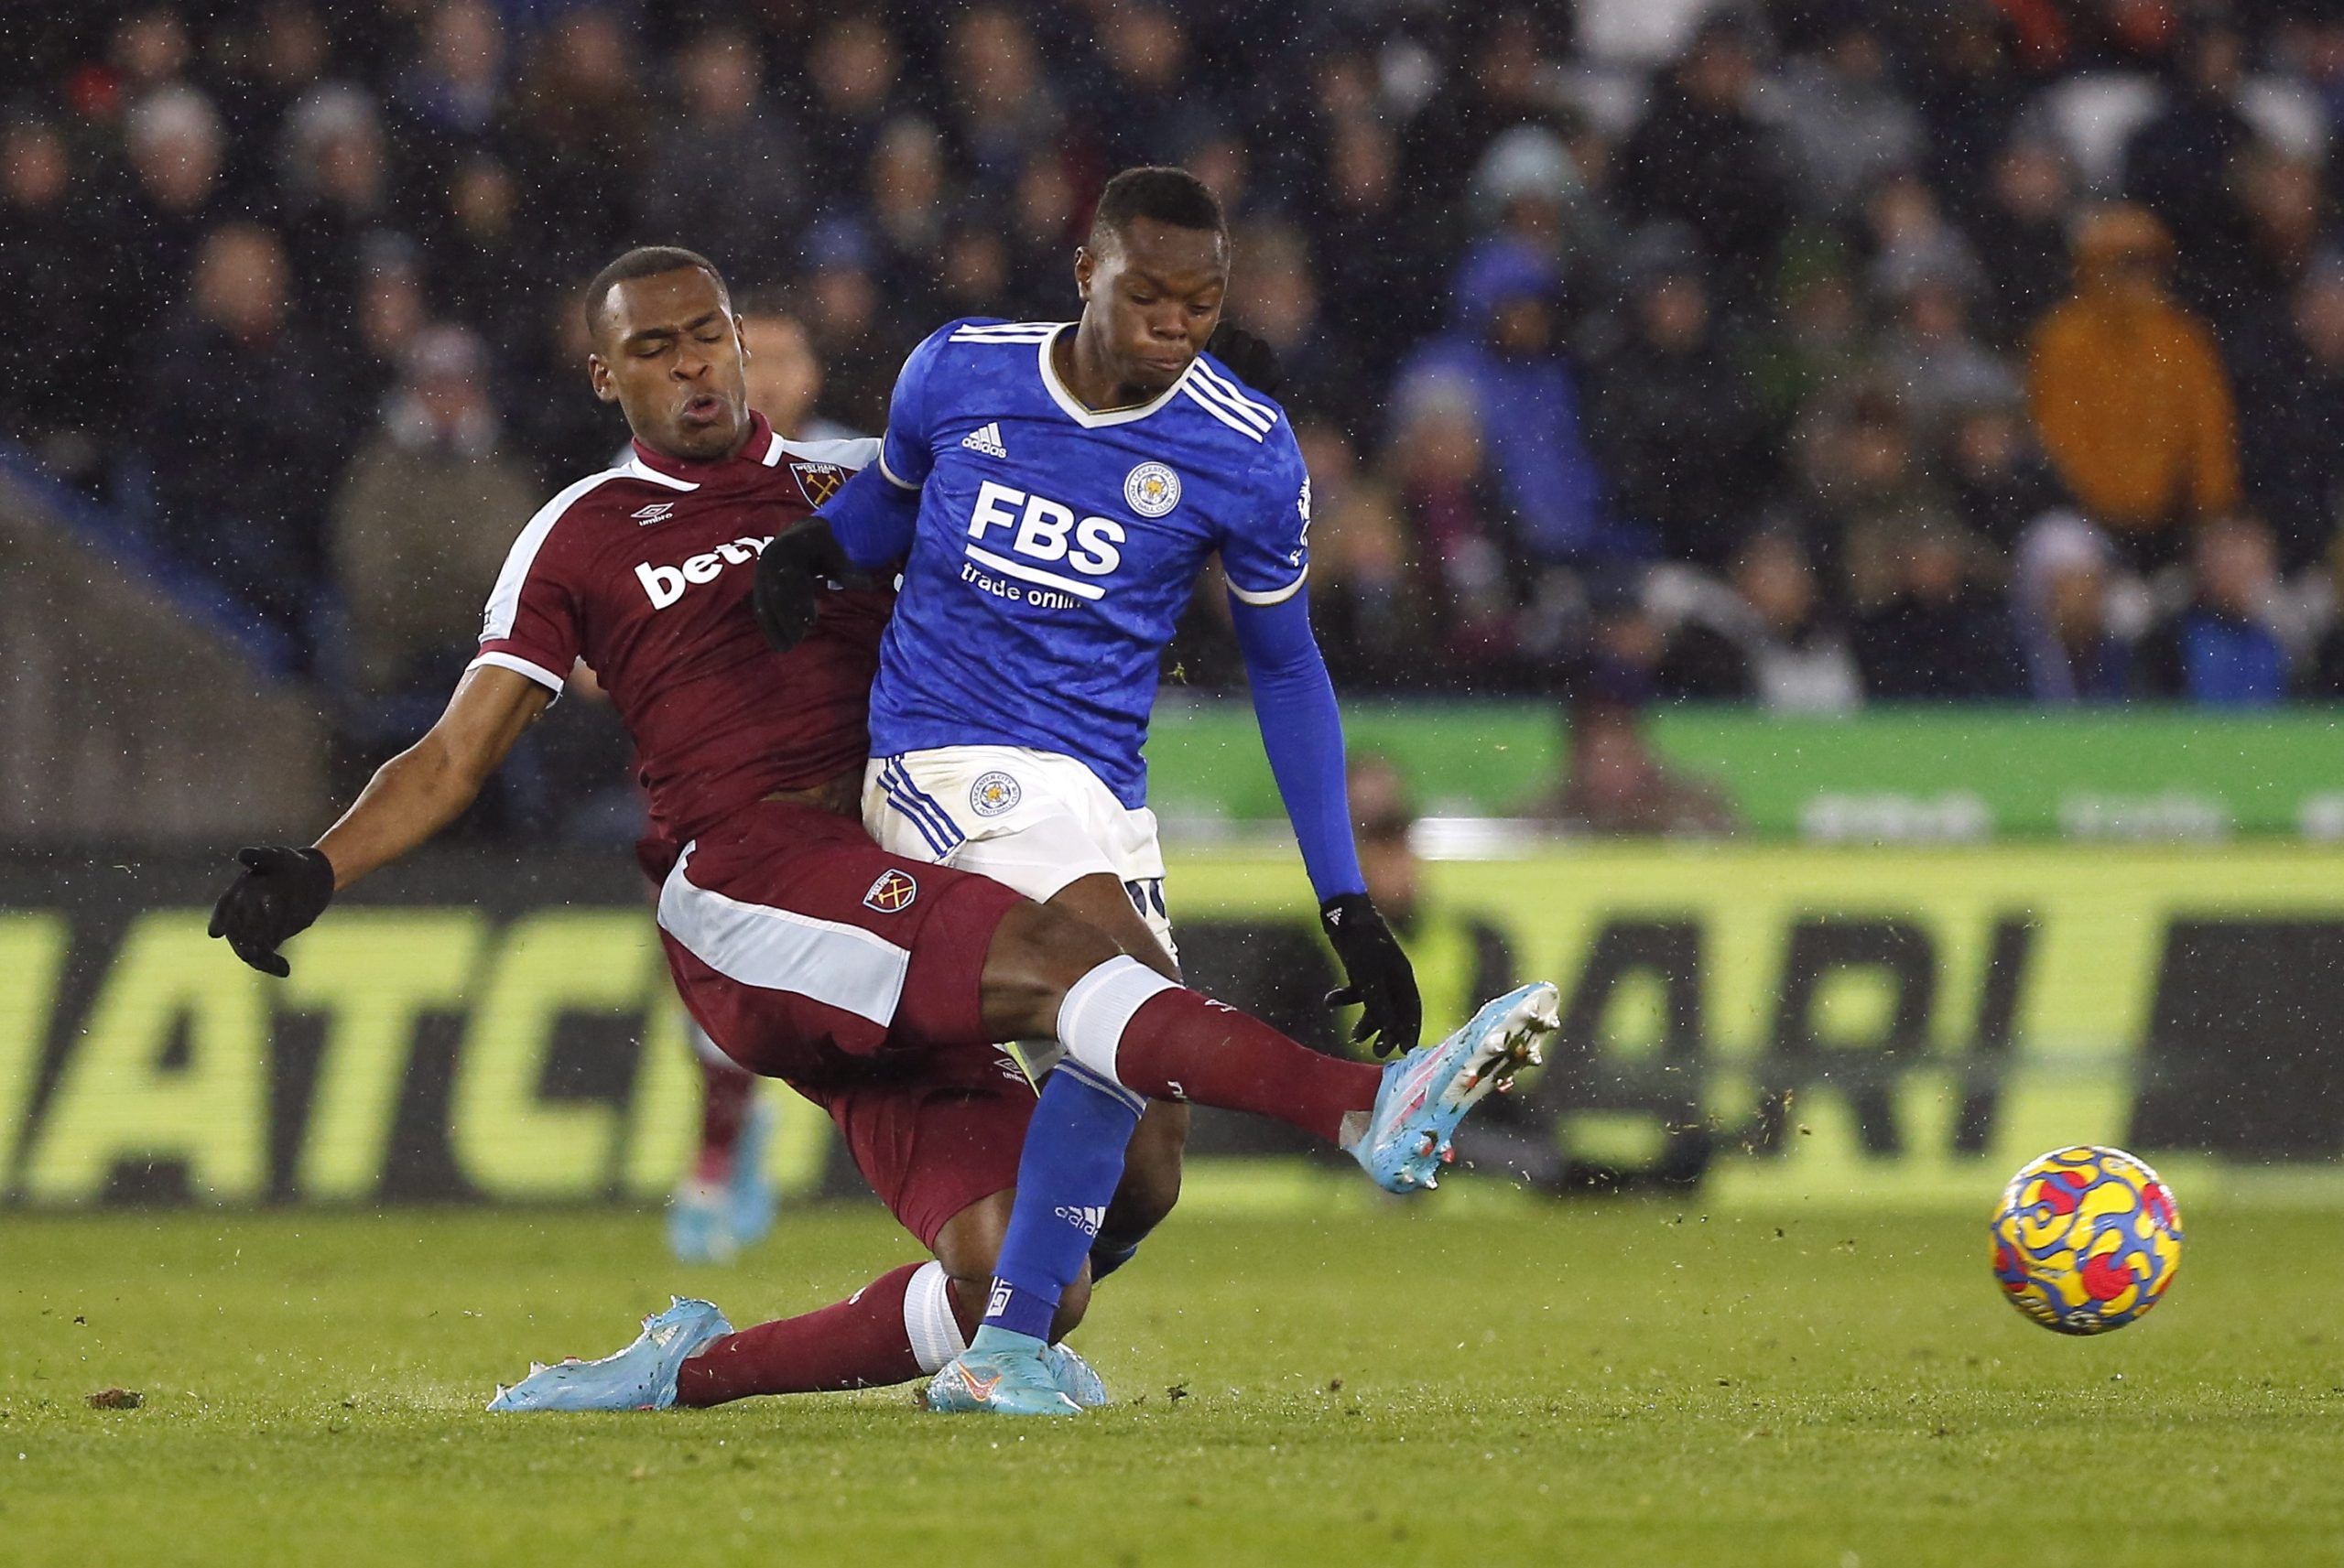 issa-diop-manchester-united-premier-league-transfer-news-ralf-rangnick-austria-job-ten-hag-transfer-war-chestSoccer Football - Premier League - Leicester City v West Ham United - King Power Stadium, Leicester, Britain - February 13, 2022 West Ham United's Issa Diop in action with Leicester City's Patson Daka REUTERS/Craig Brough EDITORIAL USE ONLY. No use with unauthorized audio, video, data, fixture lists, club/league logos or 'live' services. Online in-match use limited to 75 images, no video 